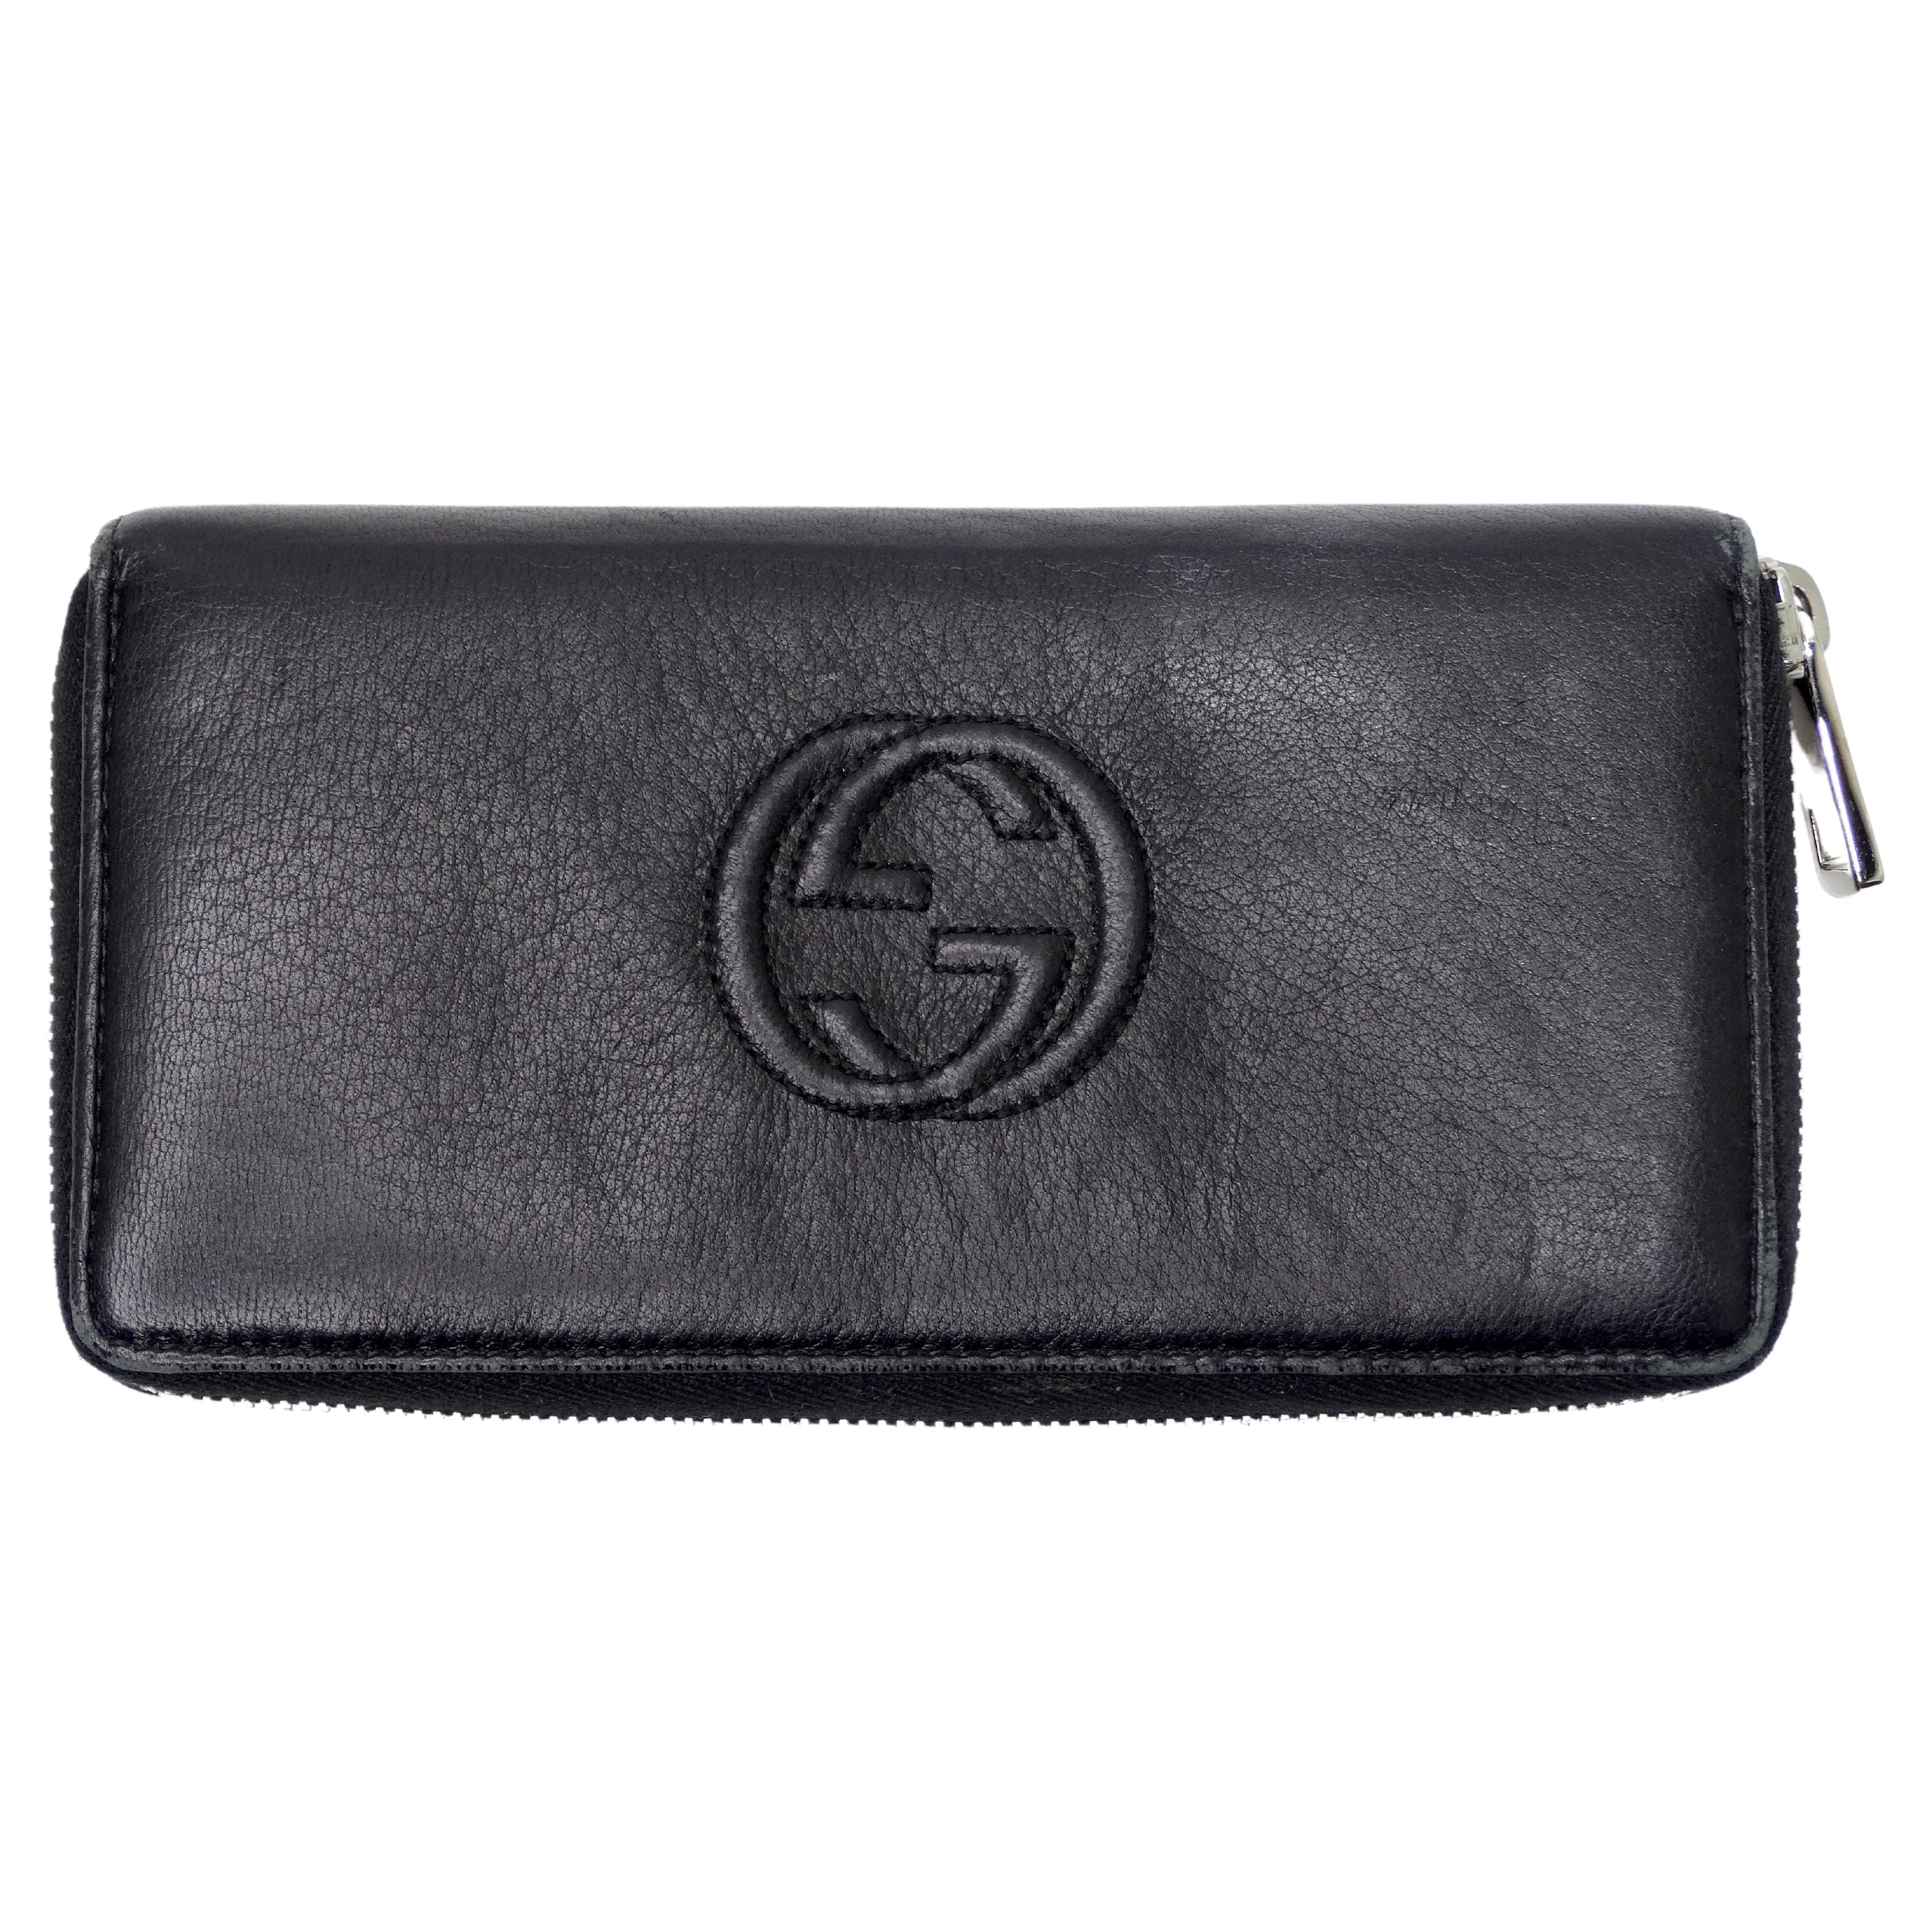 Gucci Black Leather GG Soho Wallet